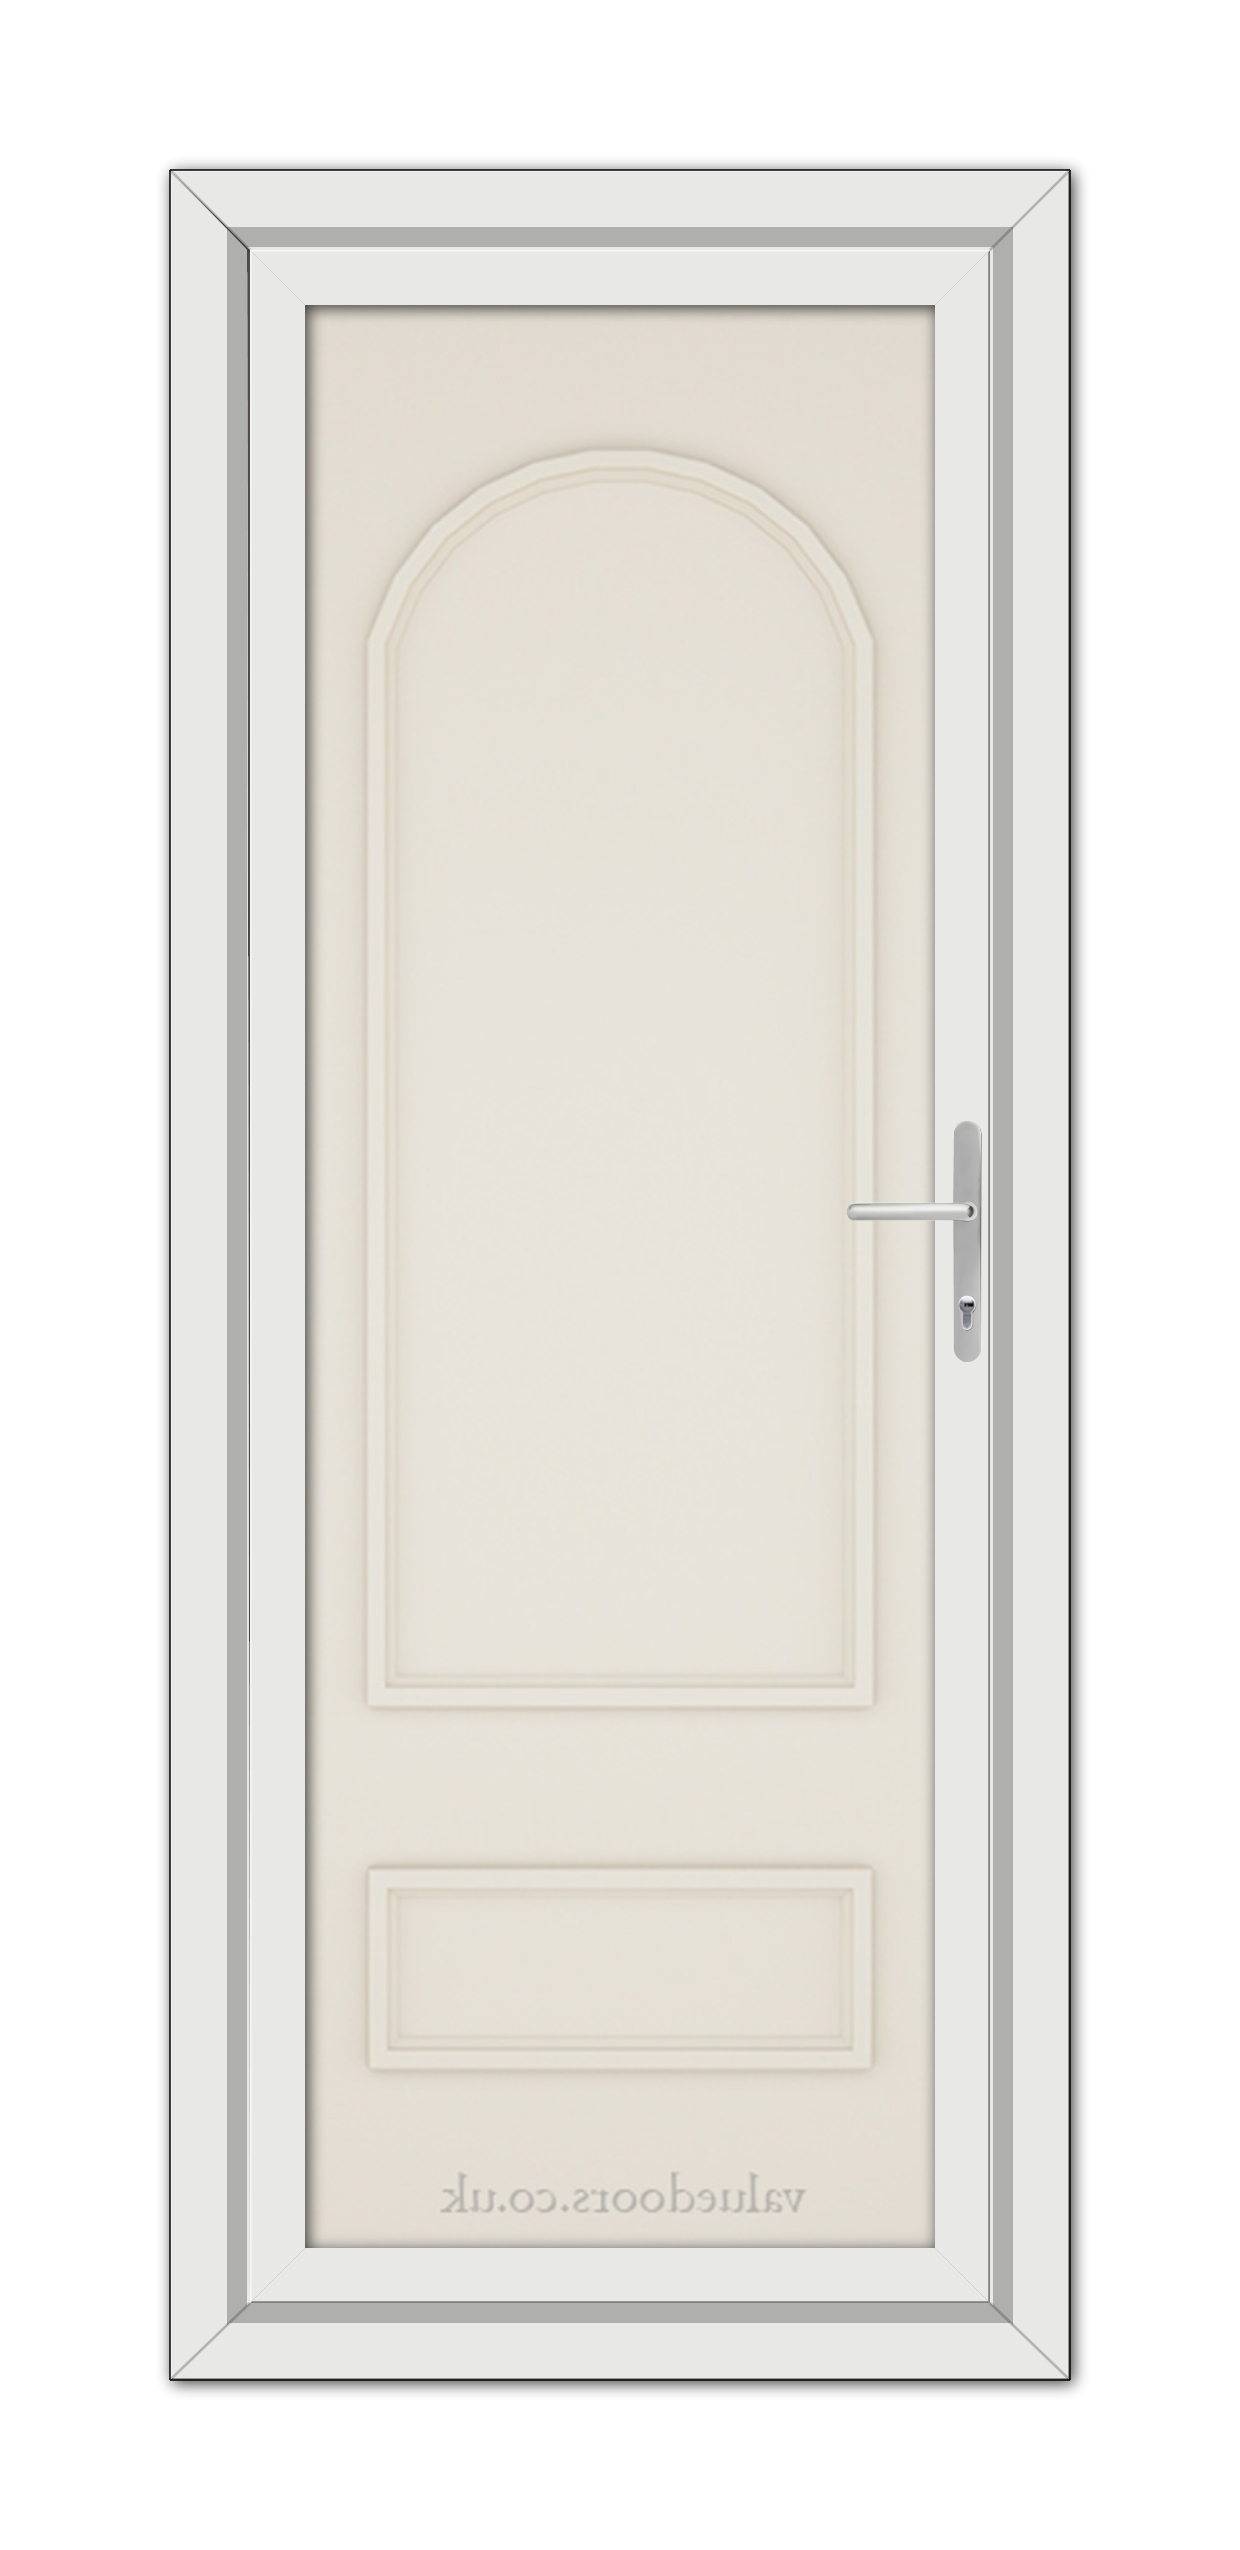 A vertical image of a closed, Cream Canterbury Solid uPVC Door with a silver handle, set within a white frame, viewed from the front.